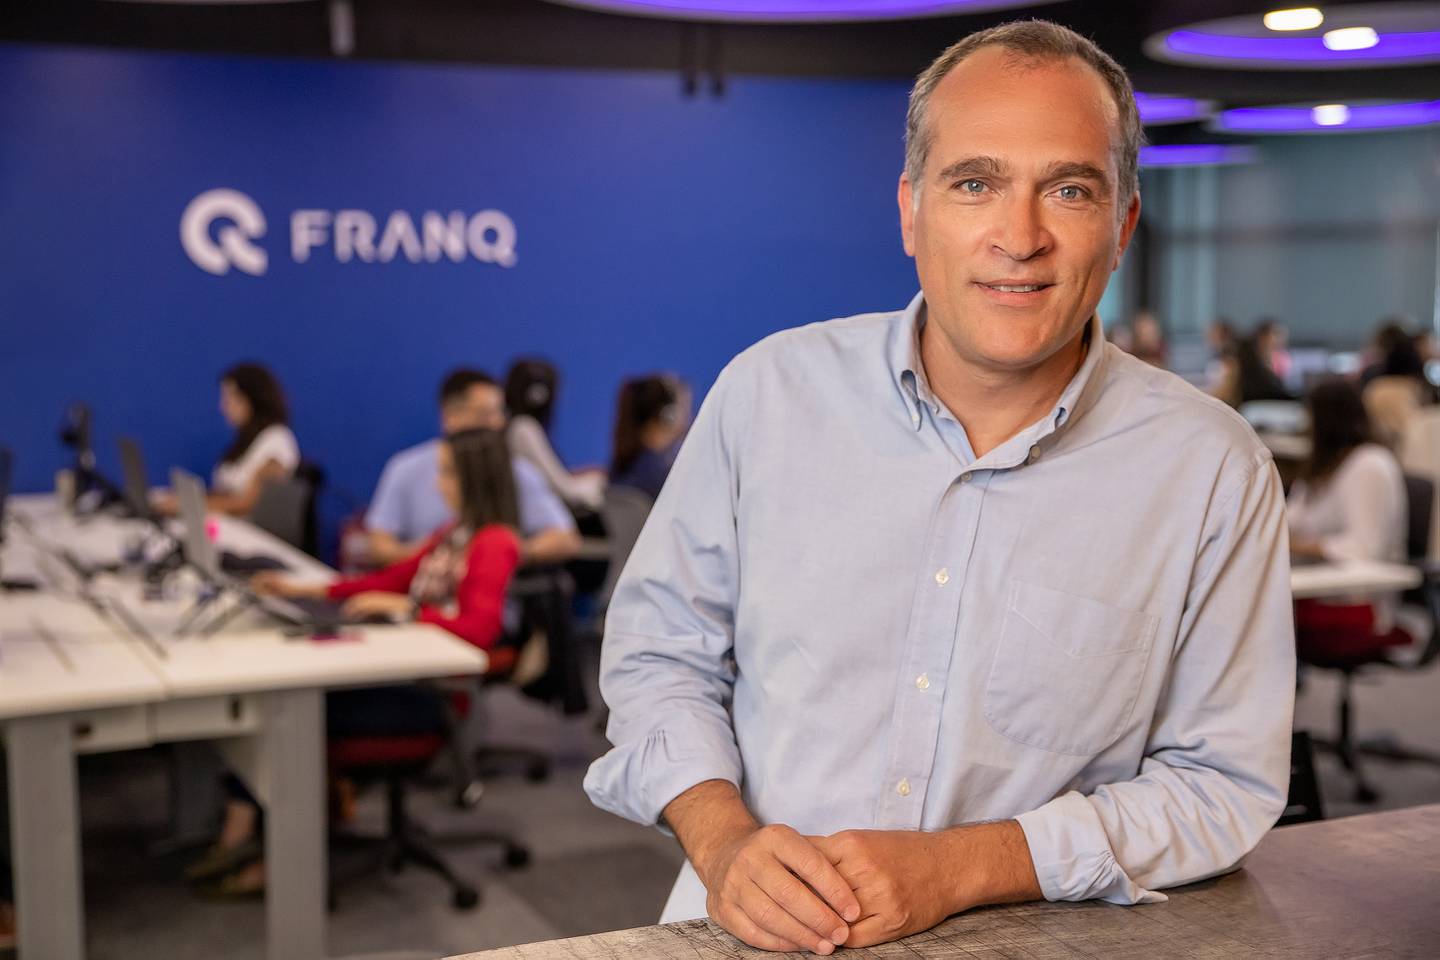 Franq is one of the Brazilian startups that raised venture capital rounds this week. Courtesy/Franq